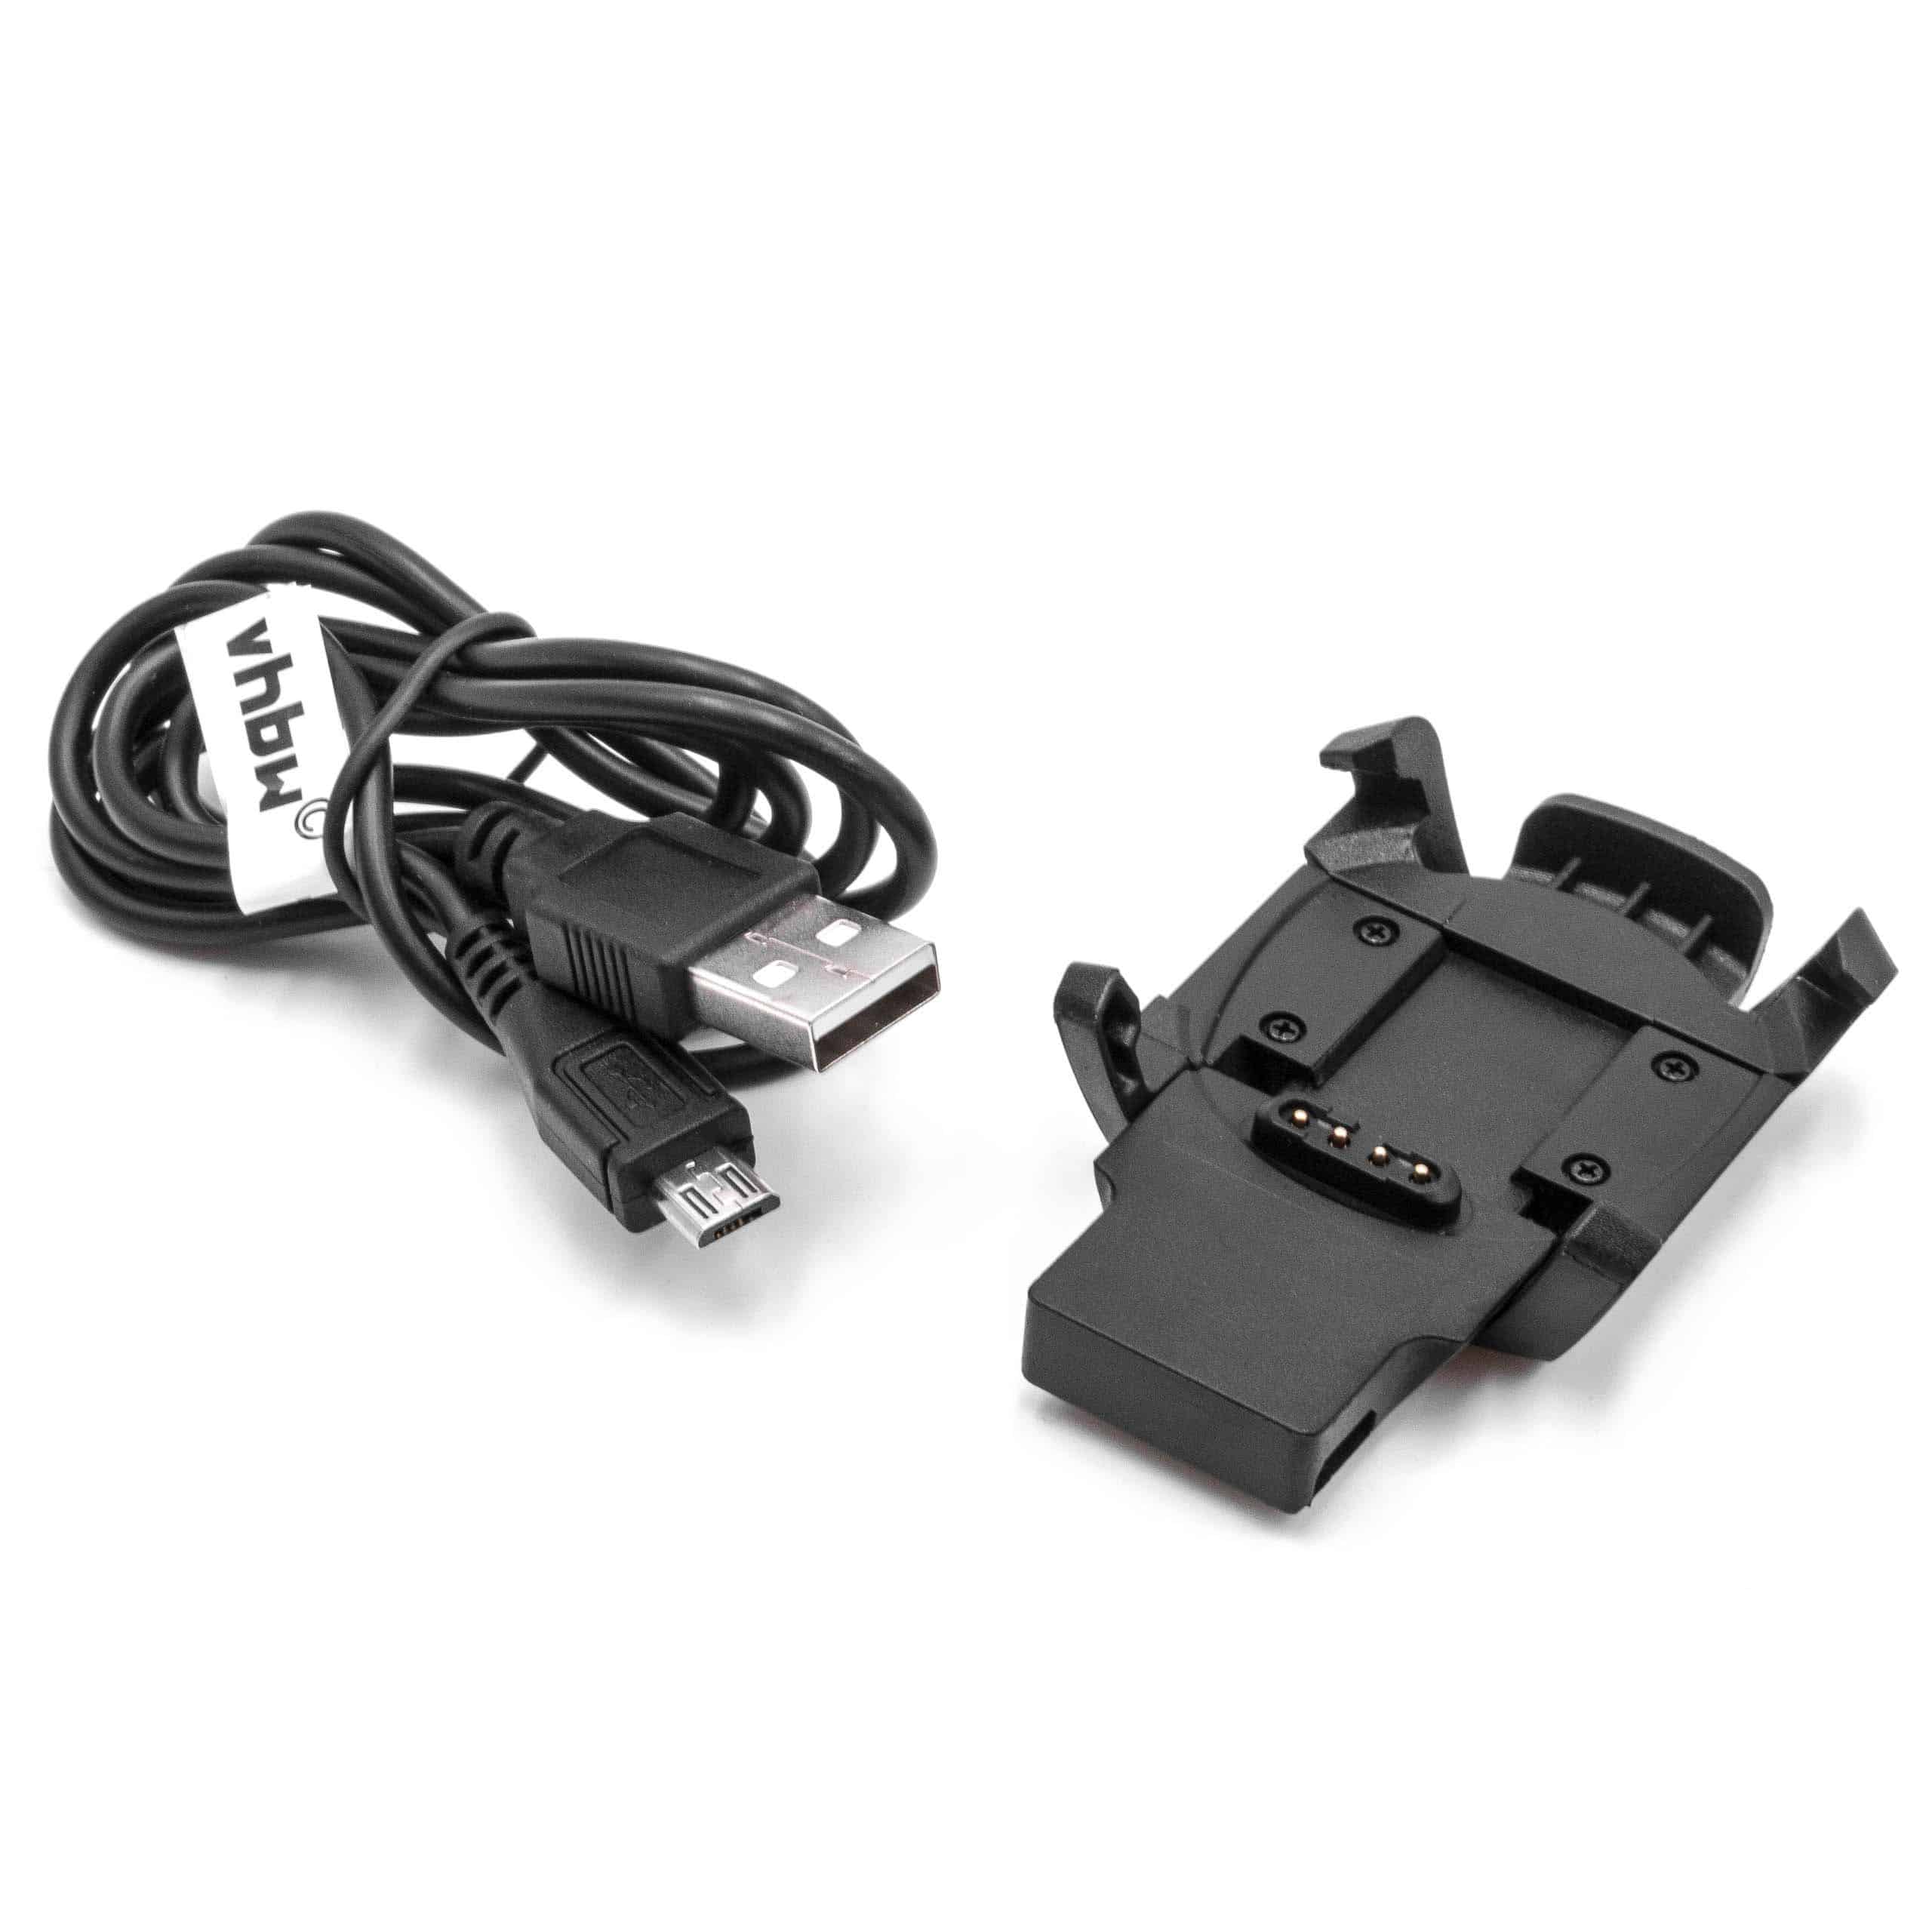 Charging Cradle suitable for Garmin Descent MK1 Fitness Tracker - Micro USB Cable, 100cm, black